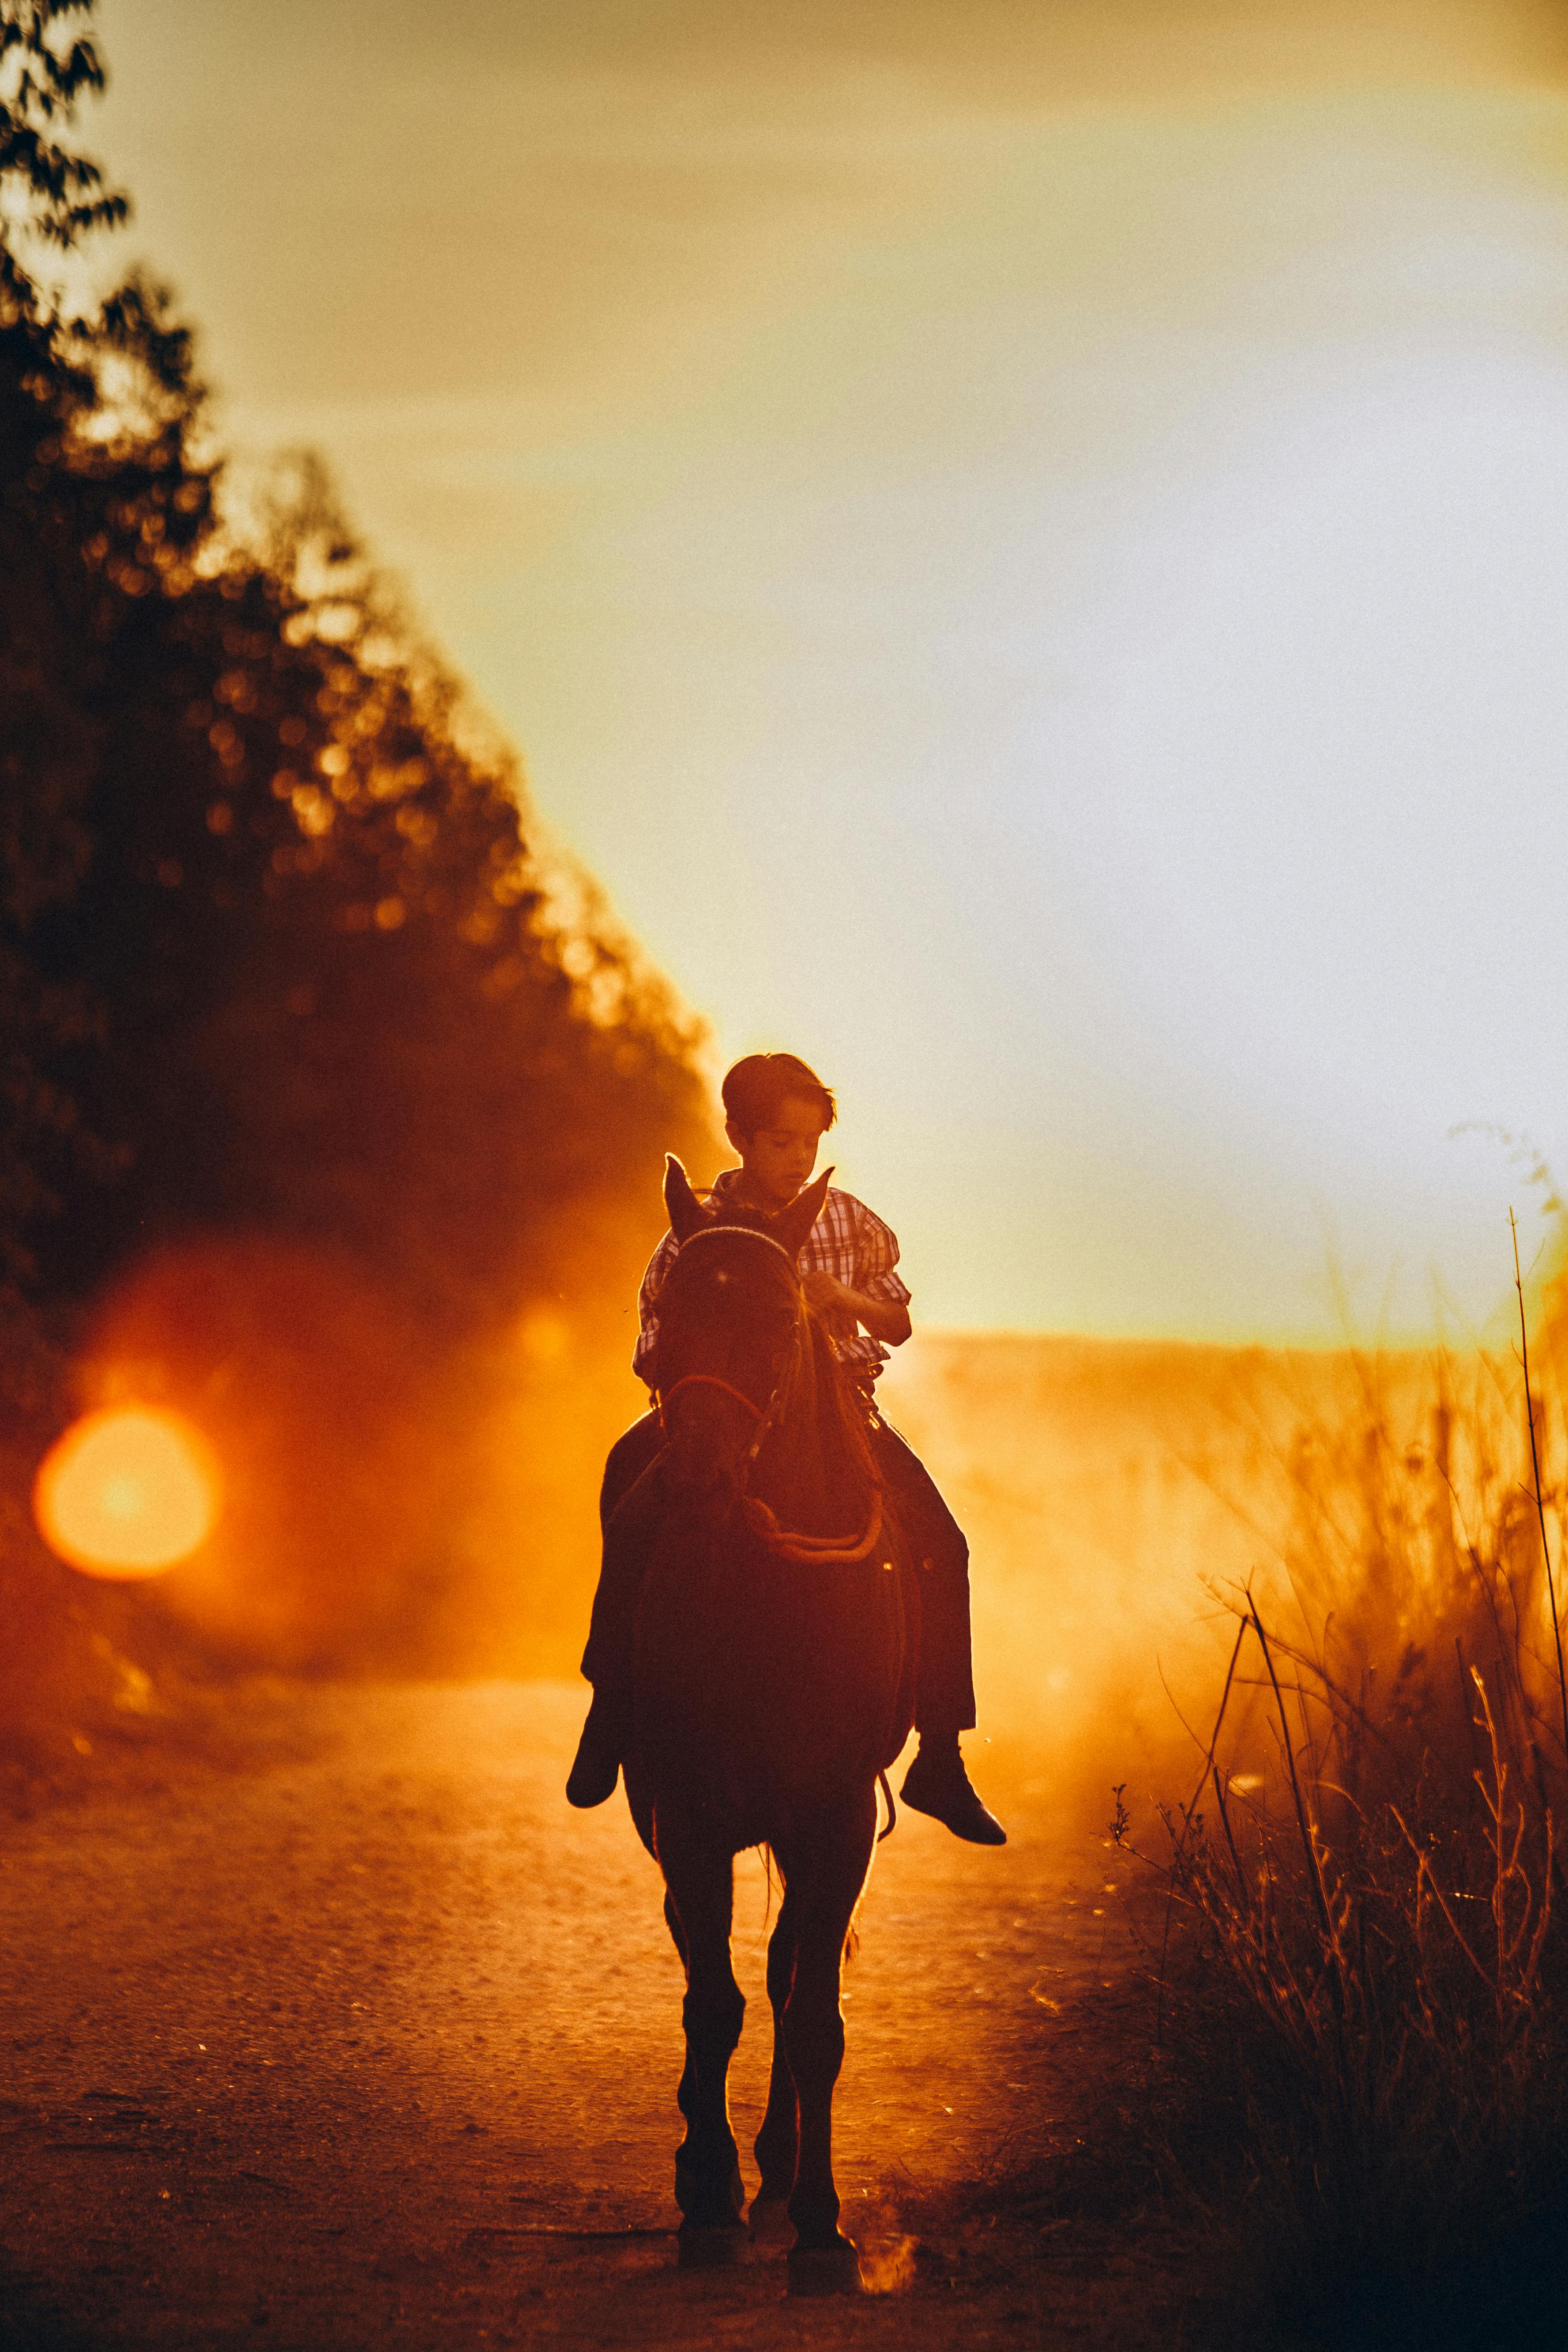 Woman Riding Horse Images | Free Photos, PNG Stickers, Wallpapers &  Backgrounds - rawpixel